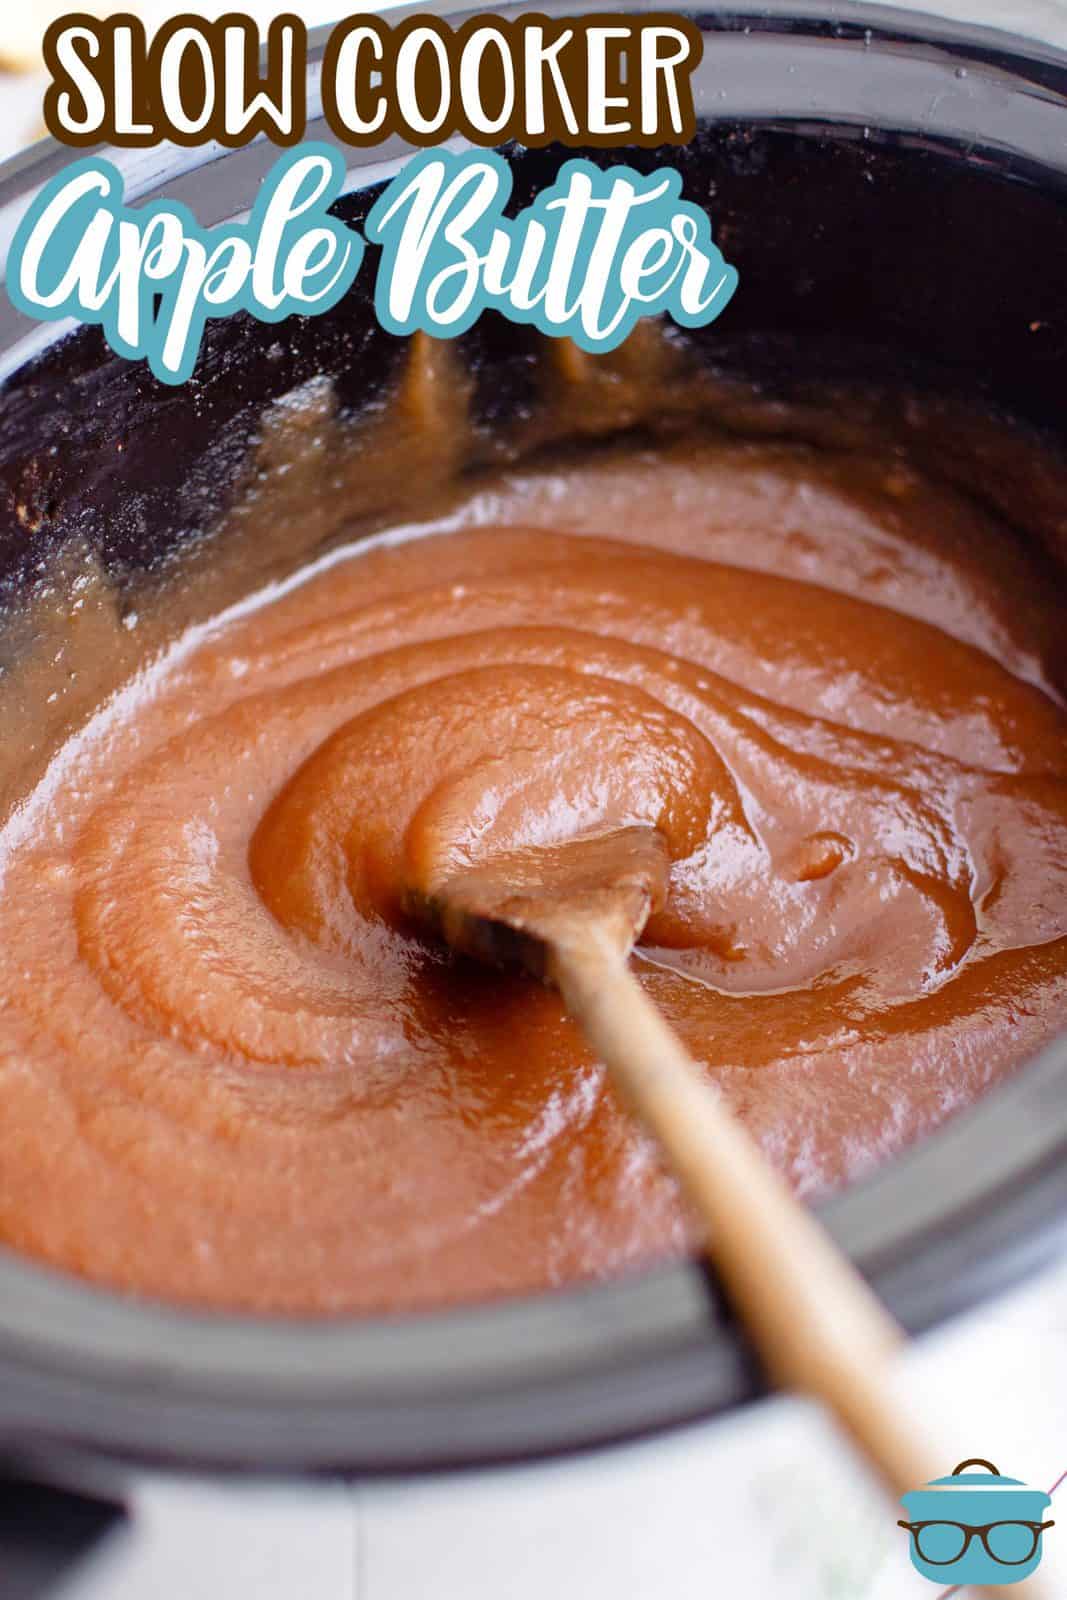 Pinterest image of Slow Cooker Apple Butter in slow cooker with wooden spoon.